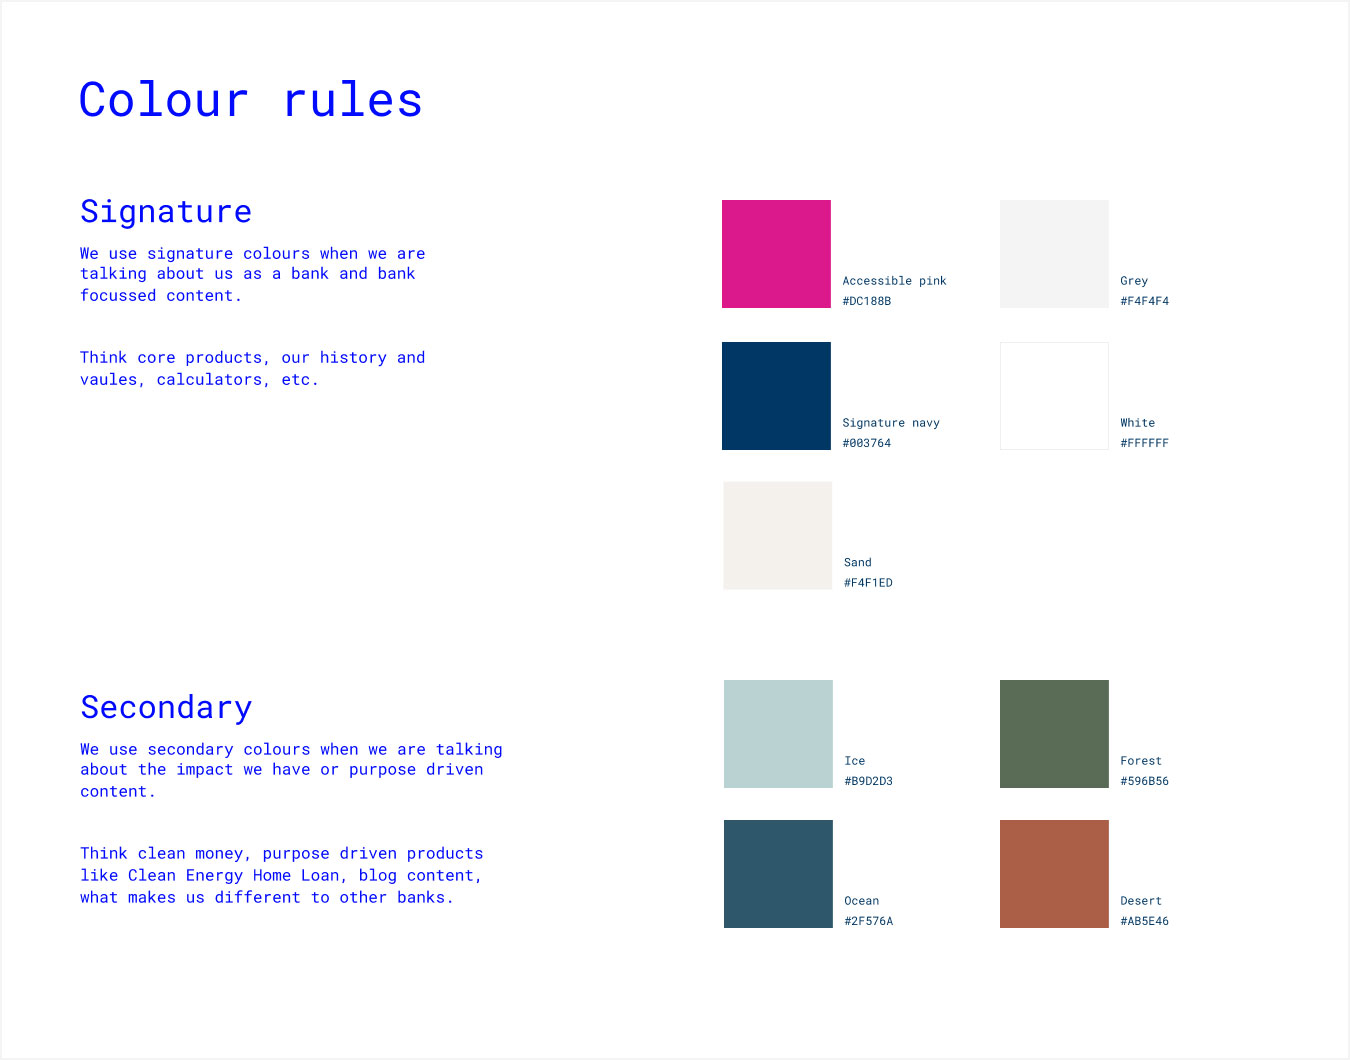 Colour rules for Bank Australia's signature and secondary colours.